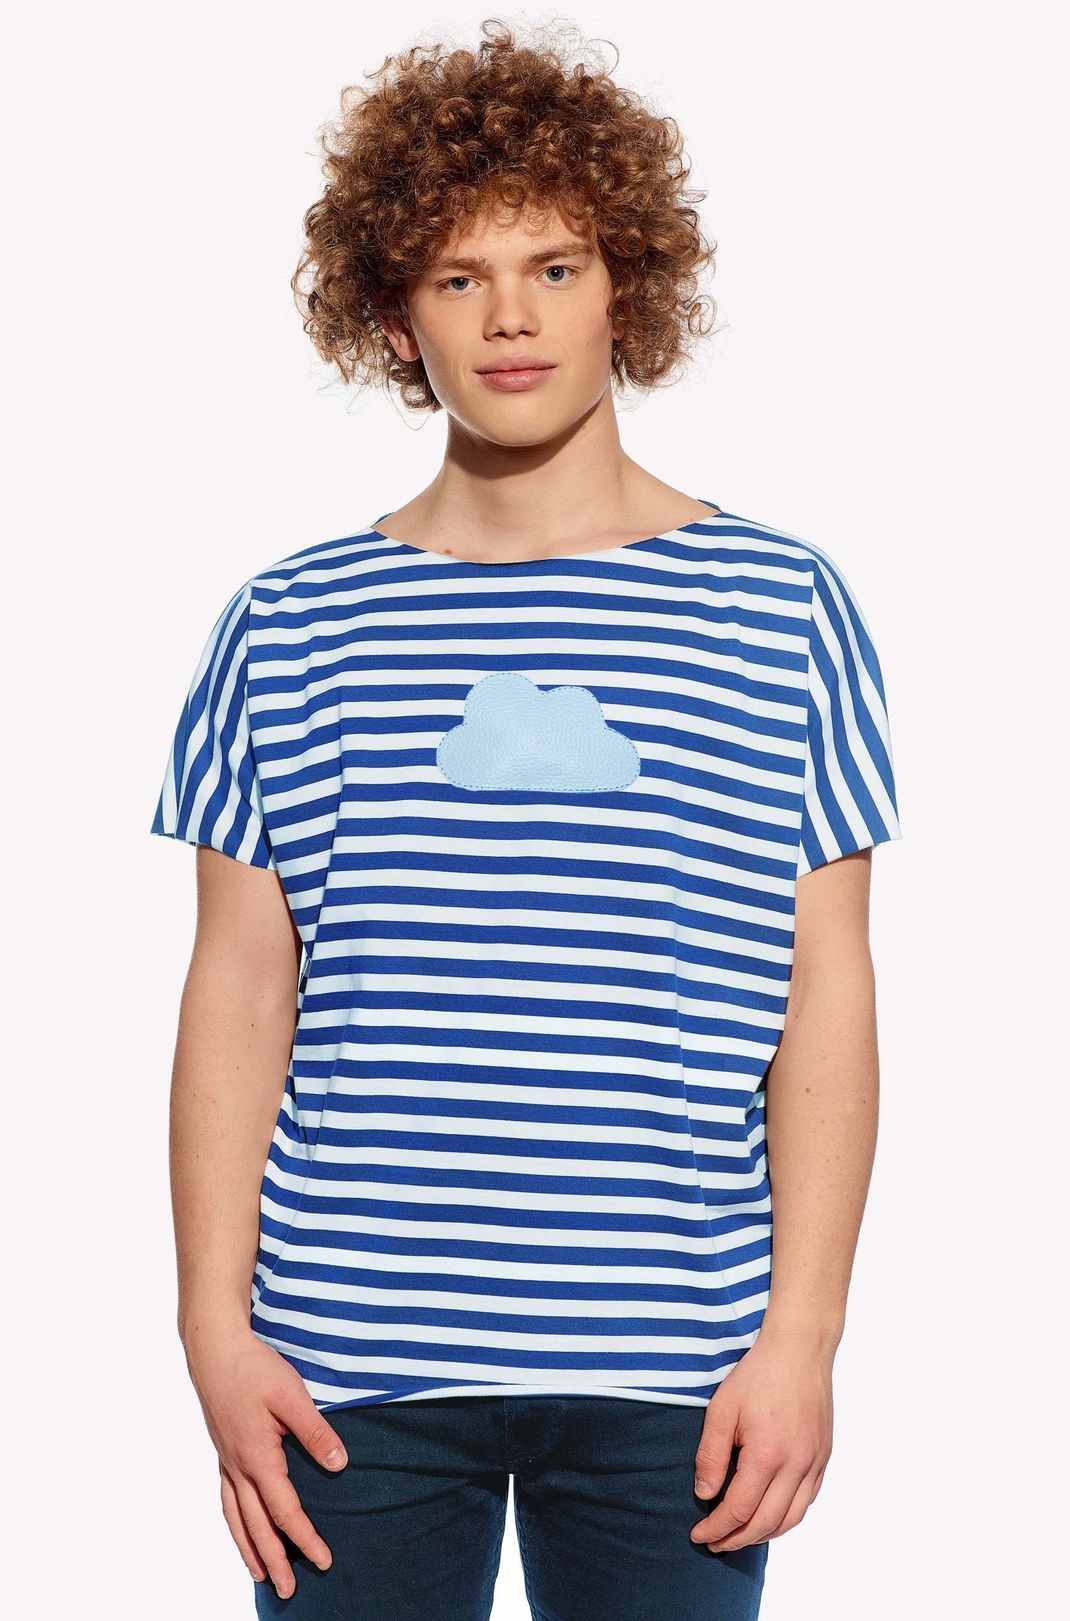 Shirt with cloud